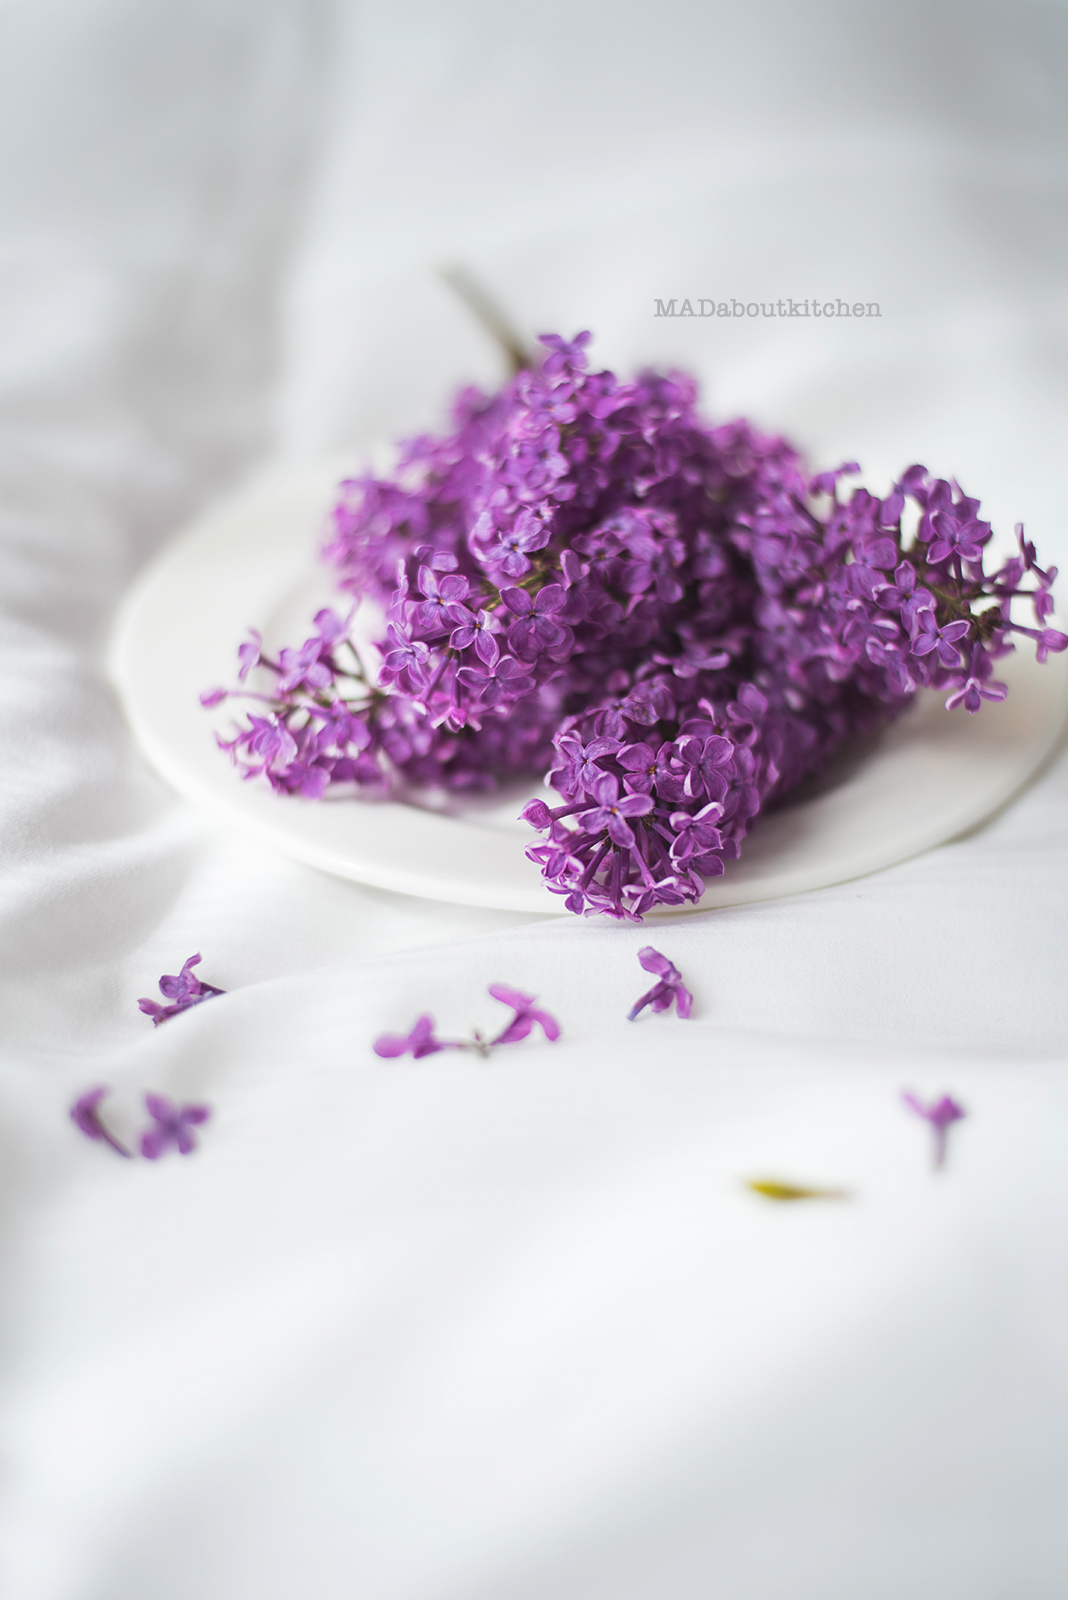 Homemade Lilac Sugar or Infused Sugar is a simple way to take a dish to a next level. Homemade Lilac Sugar is full of flavour and is  perfect for Baking and Tea. Lilac flowers are not only beautiful, but so so fragrant and so perfect for infusing.